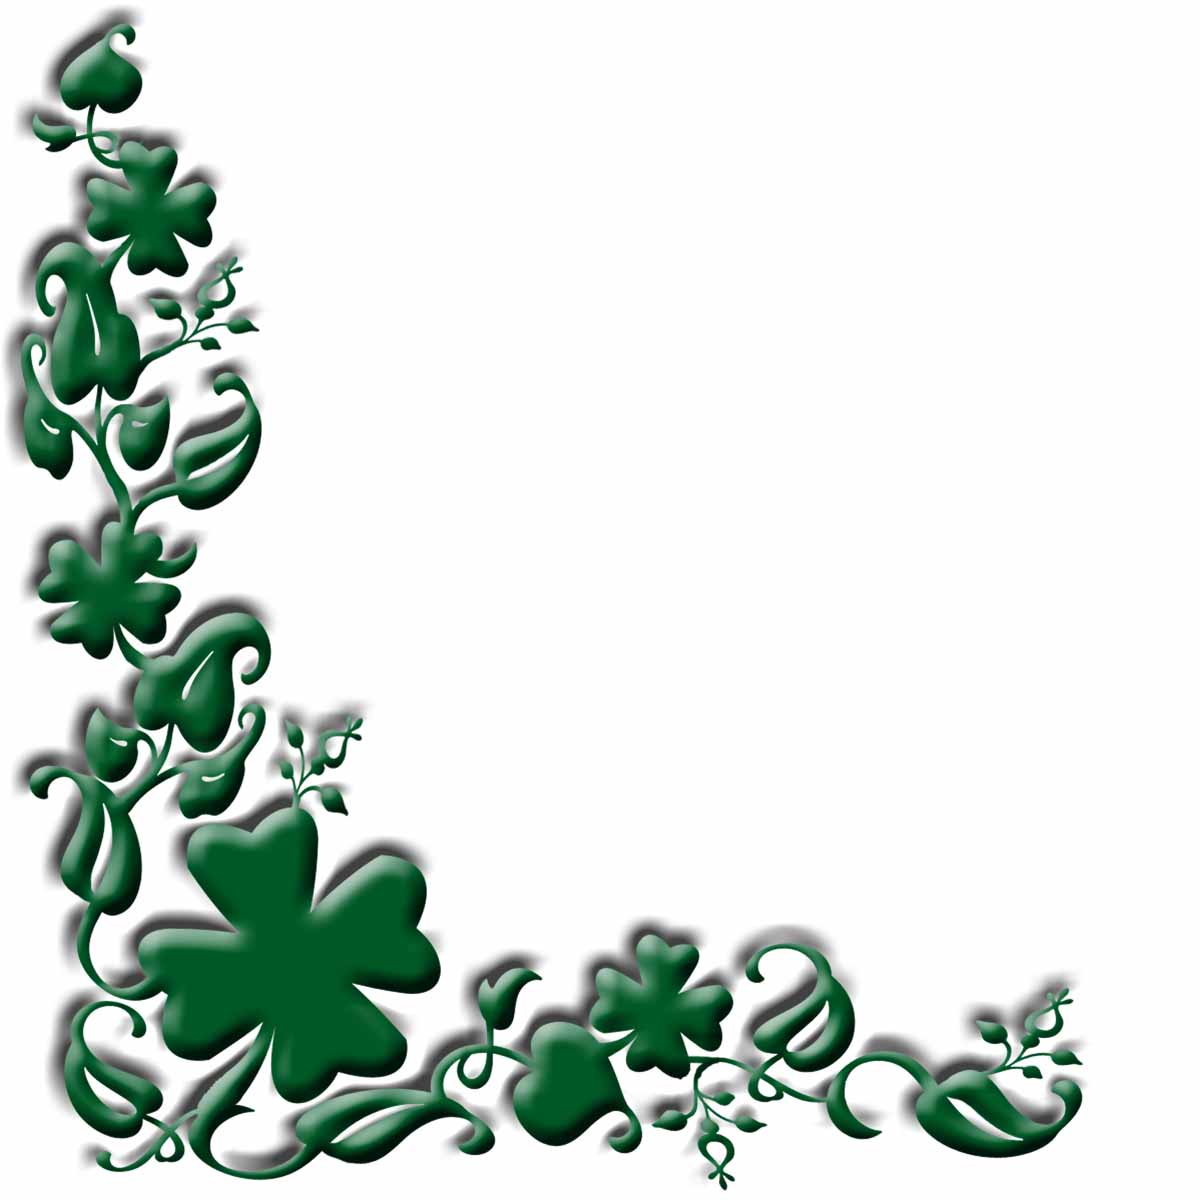 Four leaf clover clipart free images